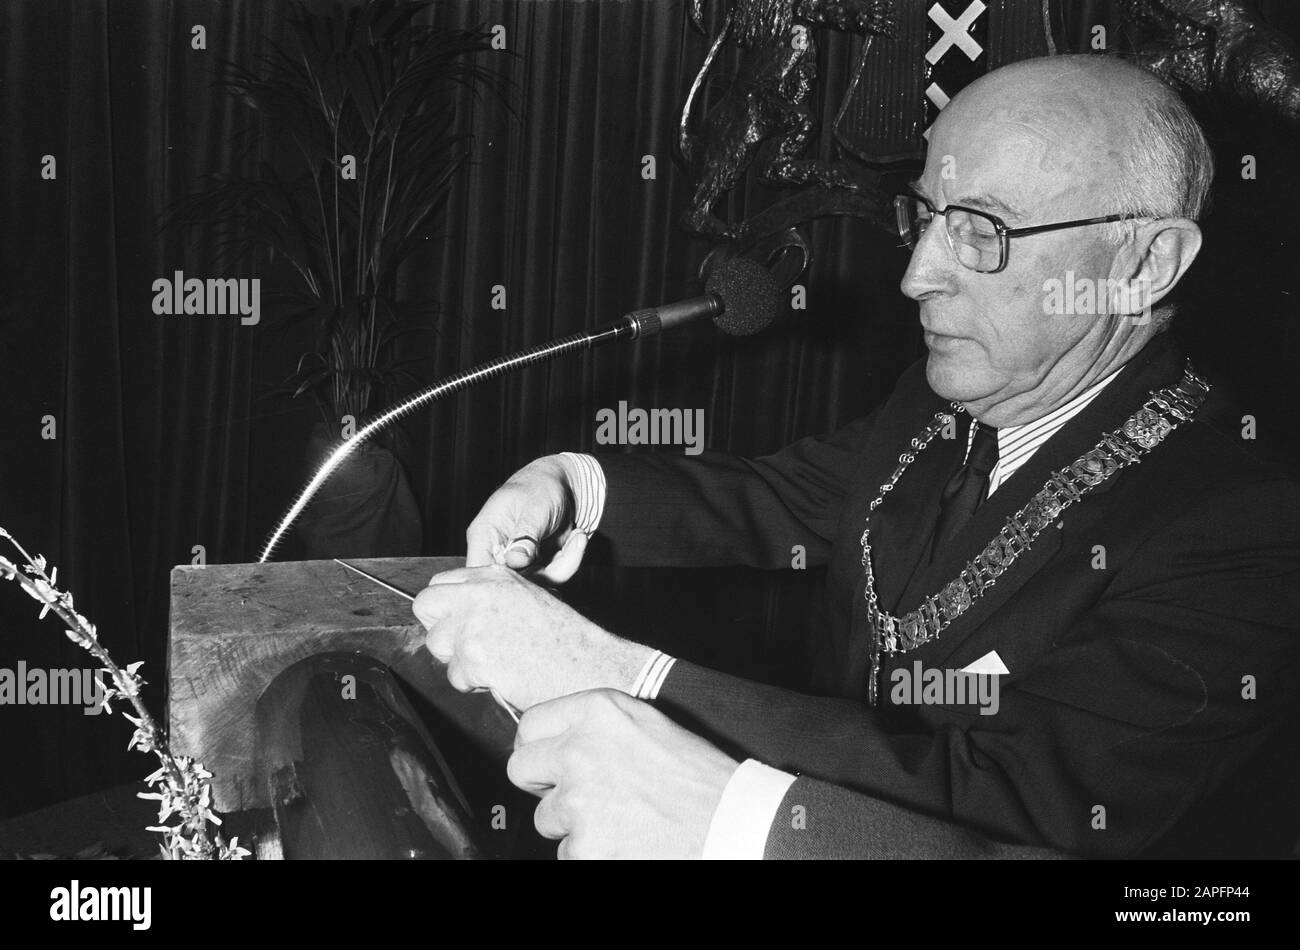 Mayor Samkalden opens new combination building of police, fire department and GG and GD Date: January 10, 1977 Keywords: FIRE, POLICE, mayors Stock Photo